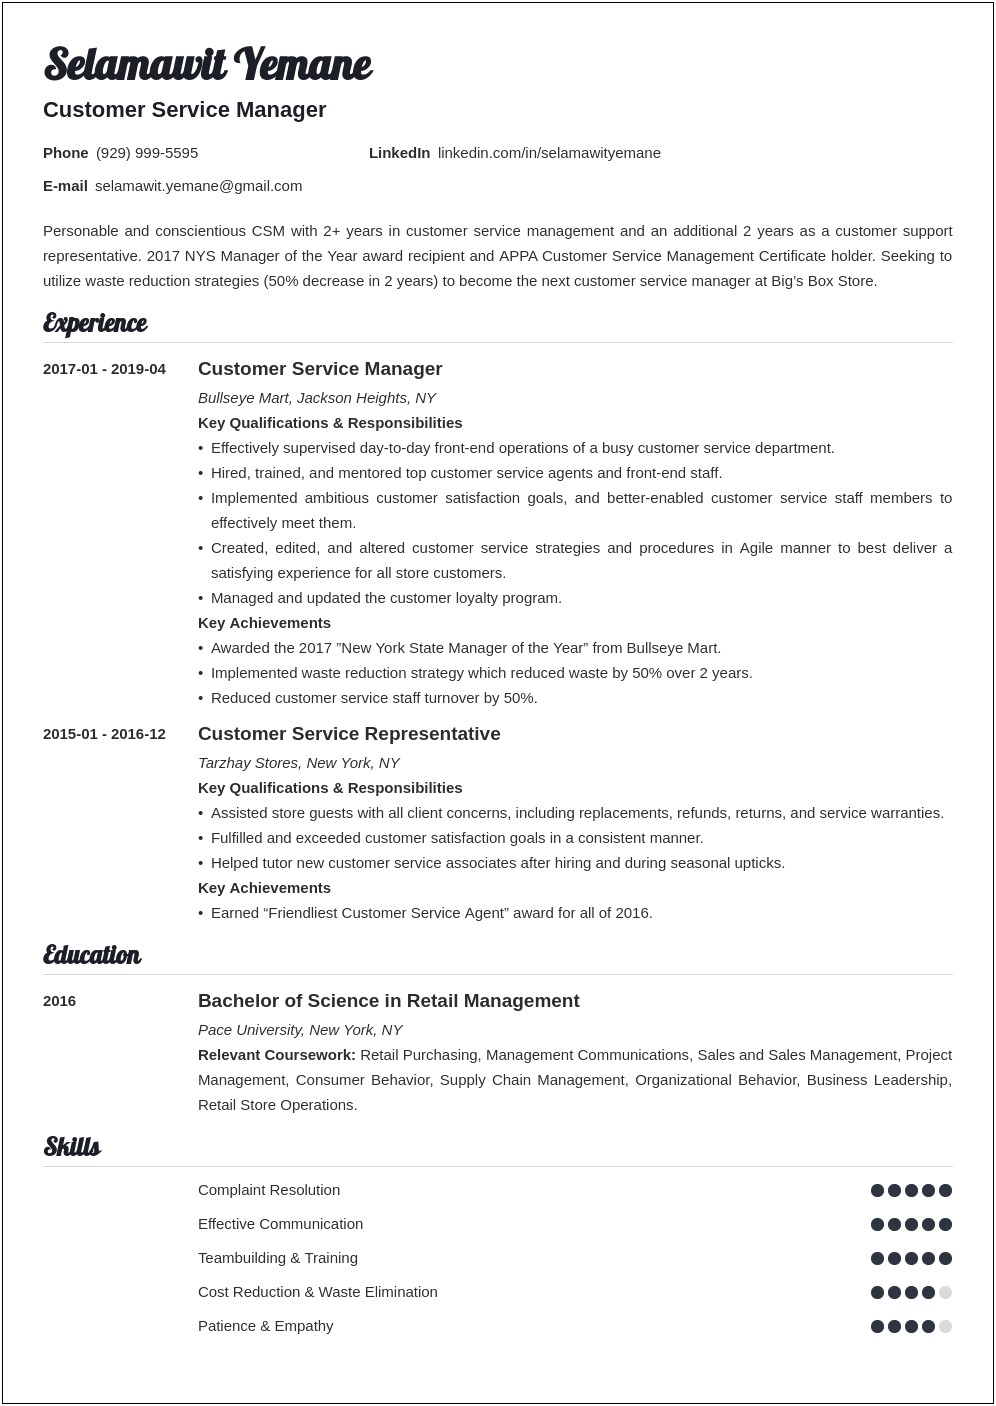 Target Executive Team Leader Guest Experience Resume